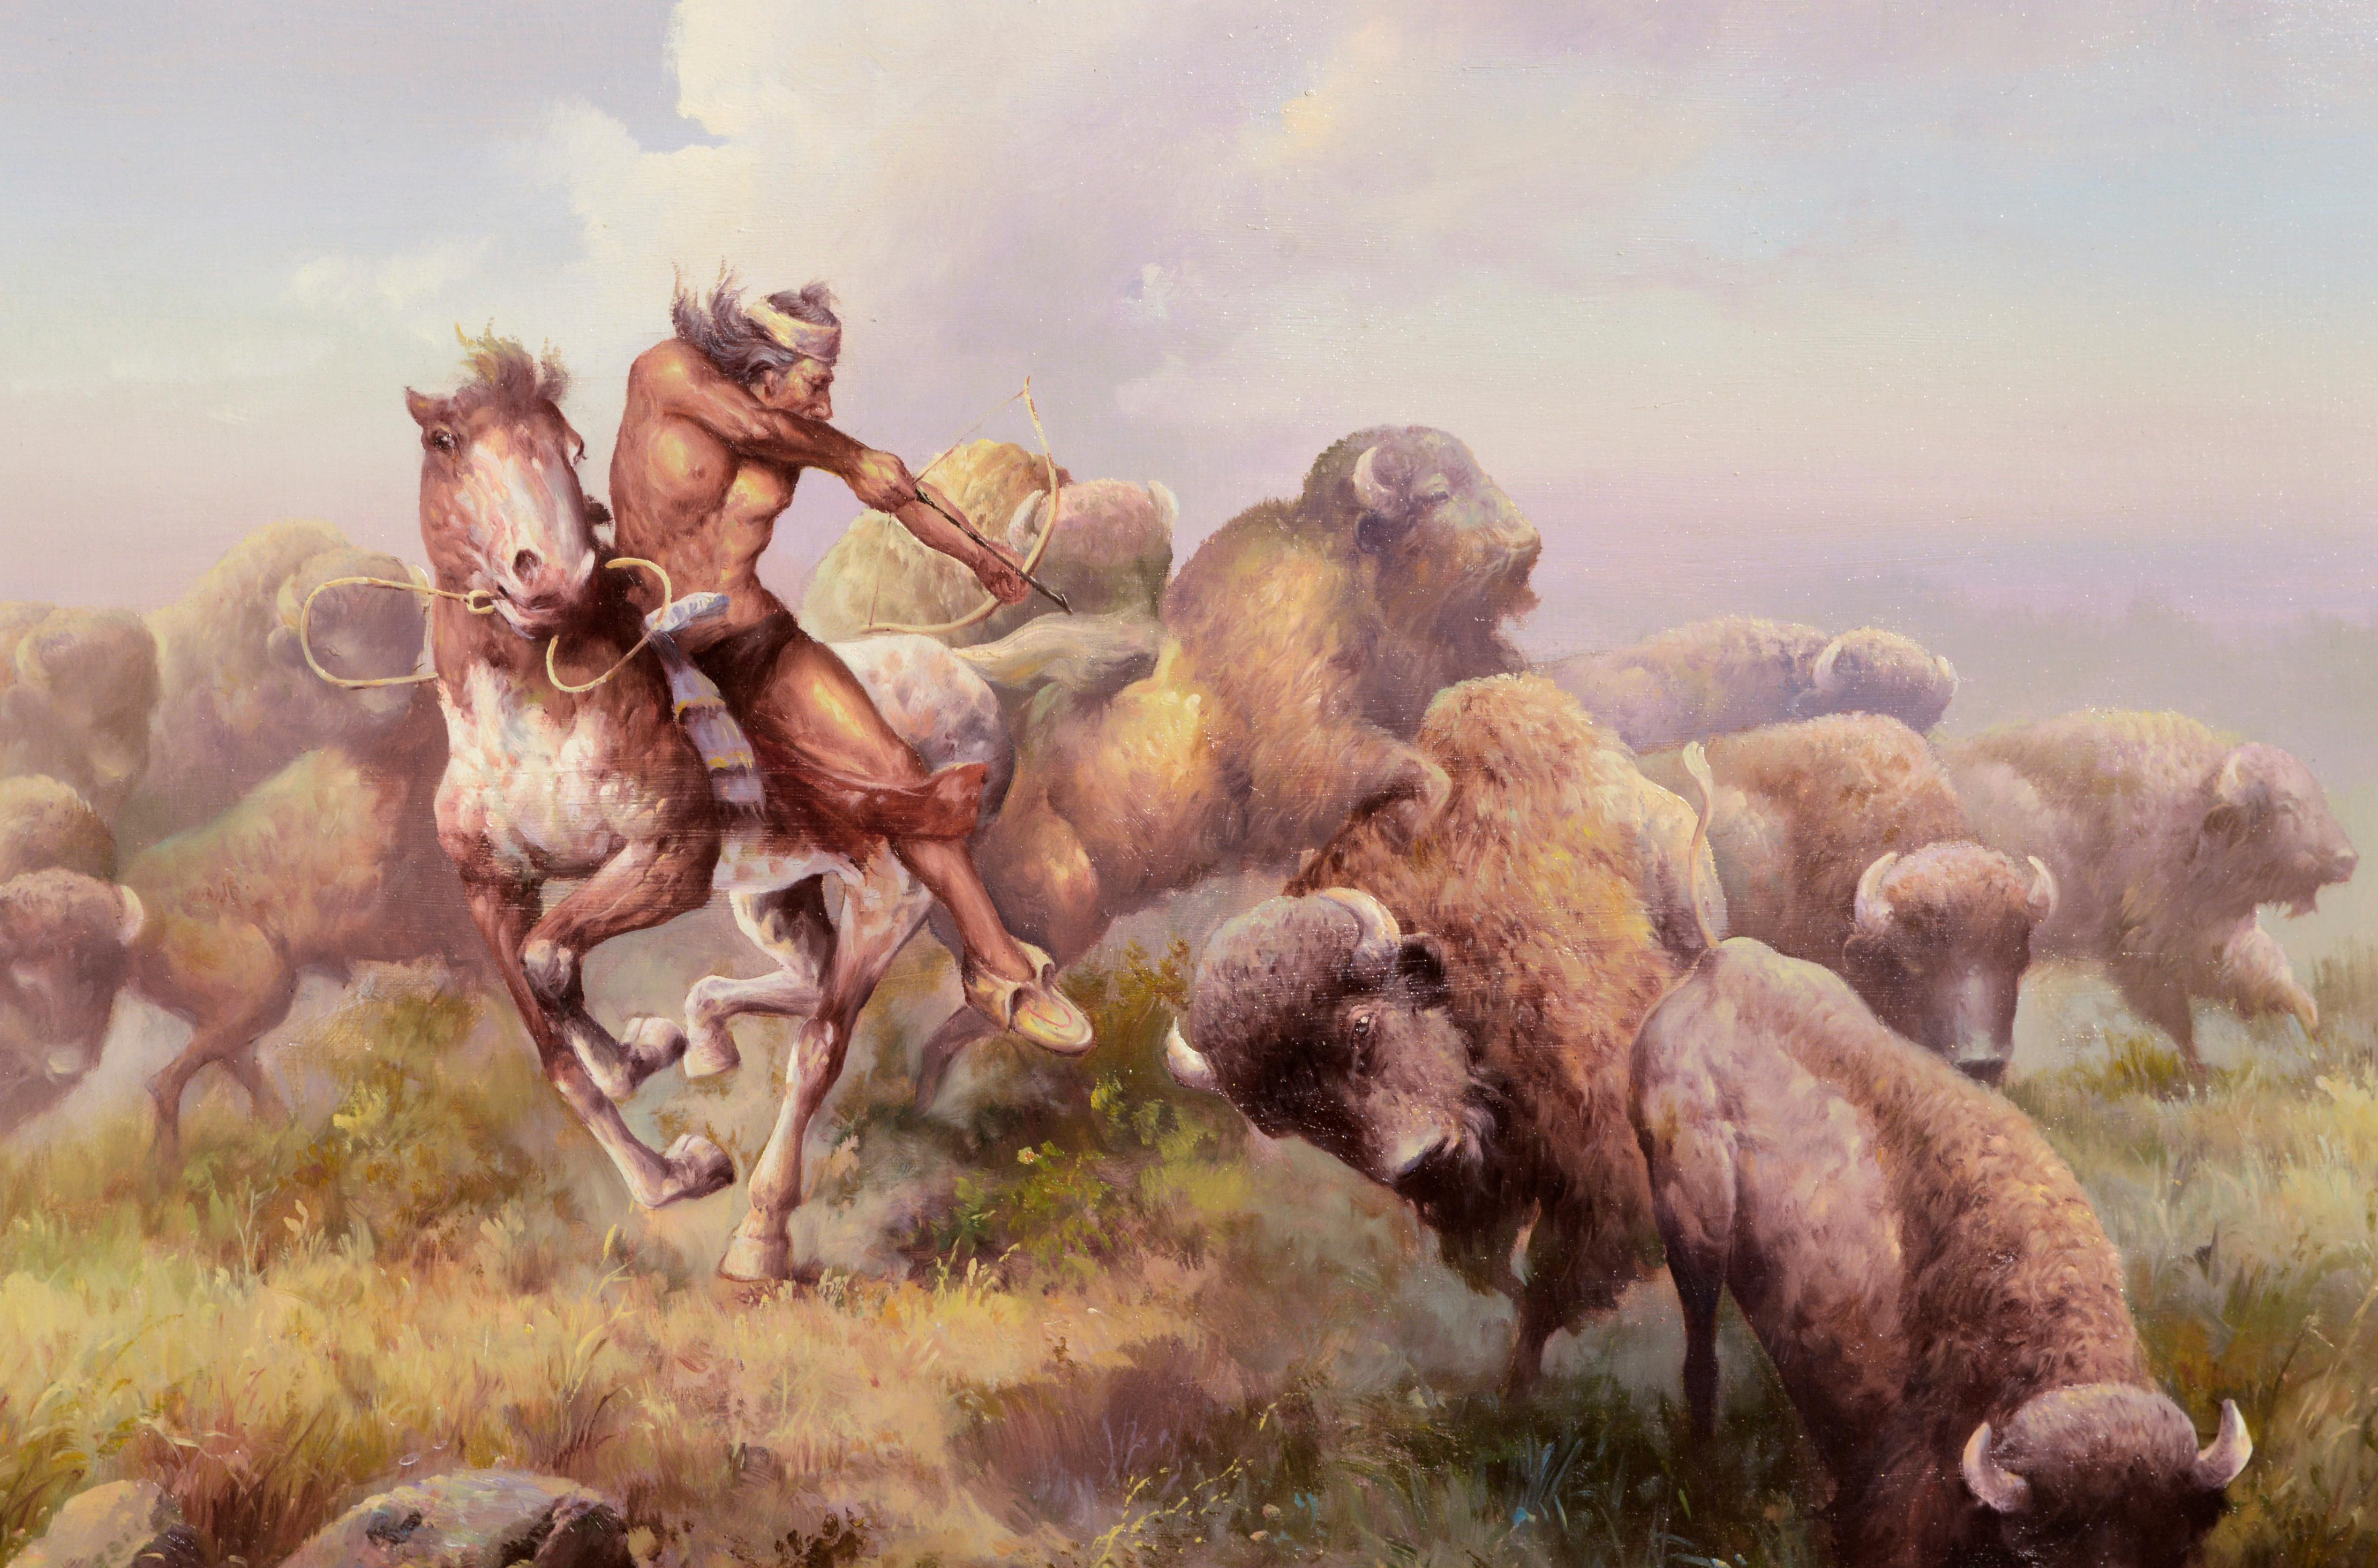 A dynamic hunting scene is portrayed in this realist figurative landscape by Troy Denton (Unknown) (20th Century). A Native American man on a horse is poised with a bow and arrow pointed at a heard of buffalo, who gather in a tumult around him.